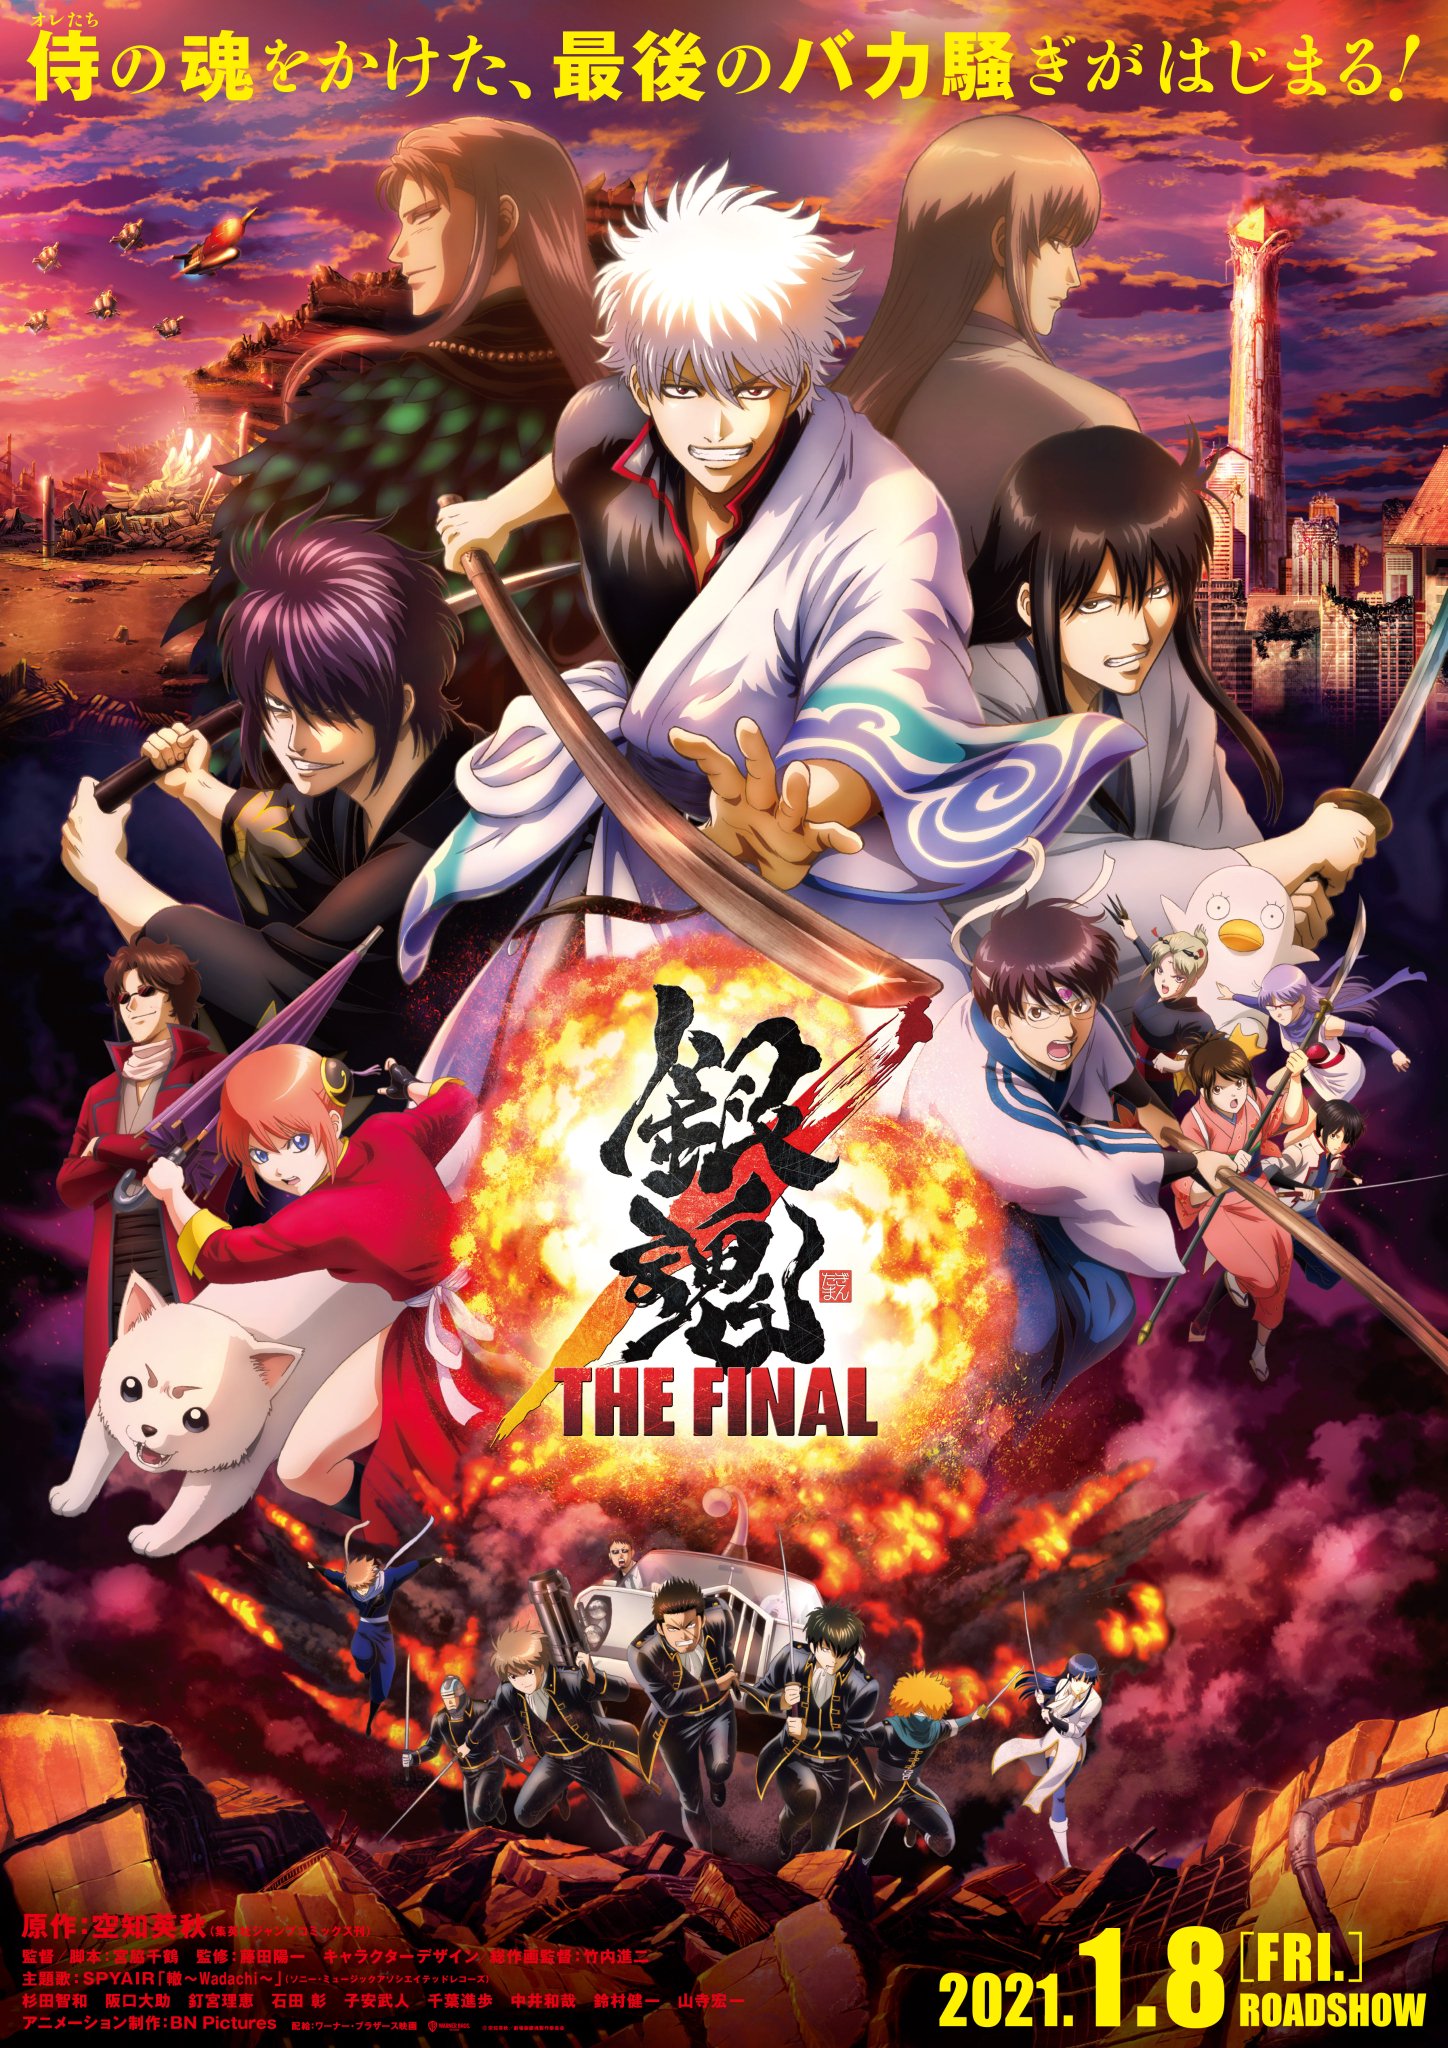 Myanimelist Gintama The Final Anime Film Reveals Poster Visual Spyair Returns To Perform Theme Song Wadachi Wadachi Opens In Japan On January 8 21 銀魂ザファイナル T Co Rdd7xqh3oa T Co Sq4fphhil9